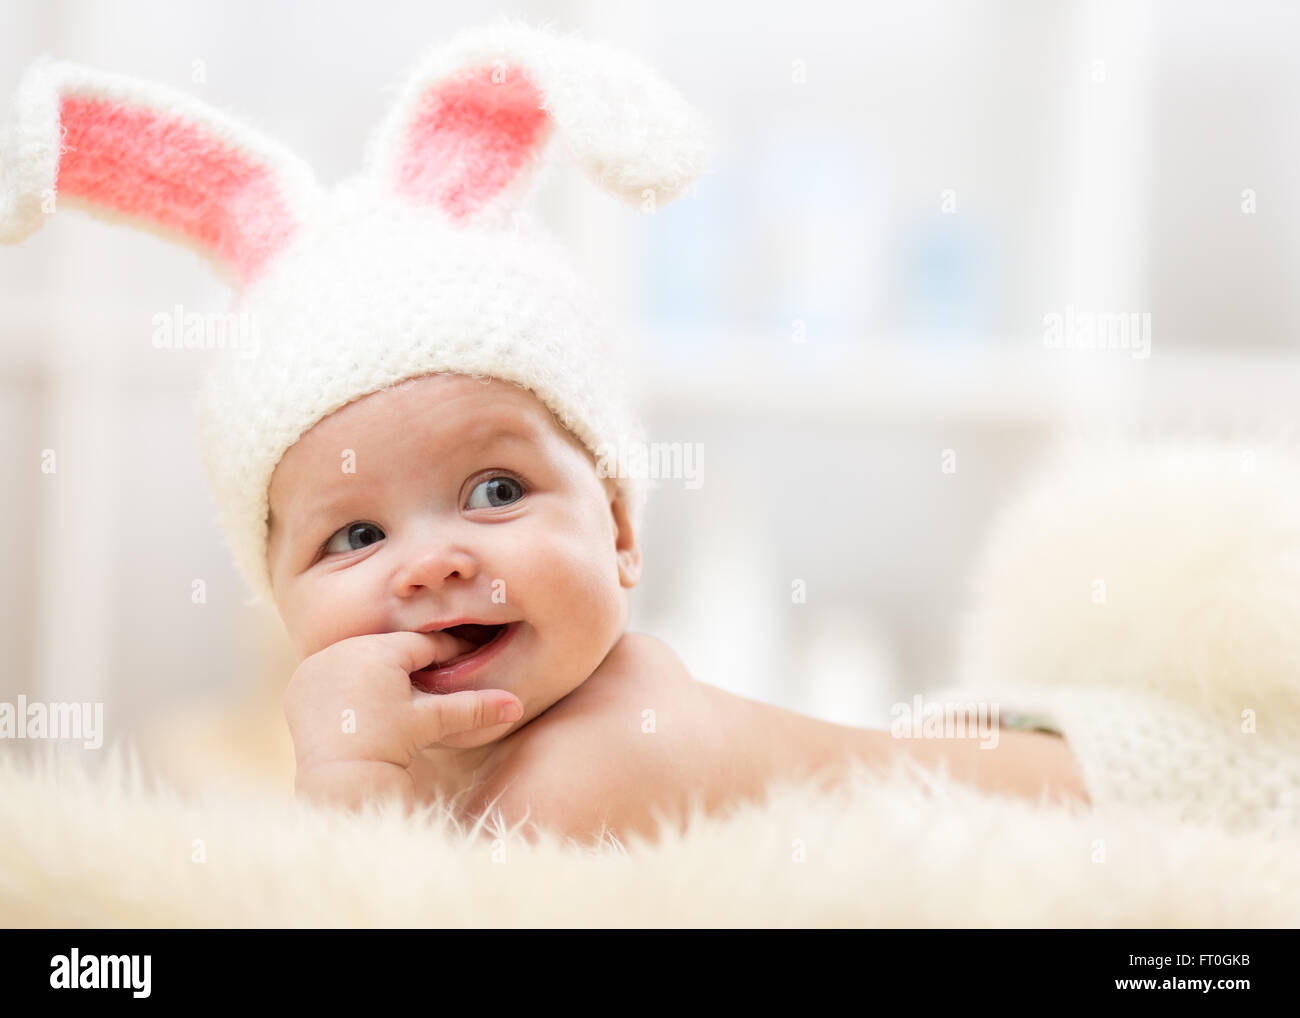 Cute baby lying on fur blanket and wearing a hat in the form of a Christmas bunny with pink ears Stock Photo